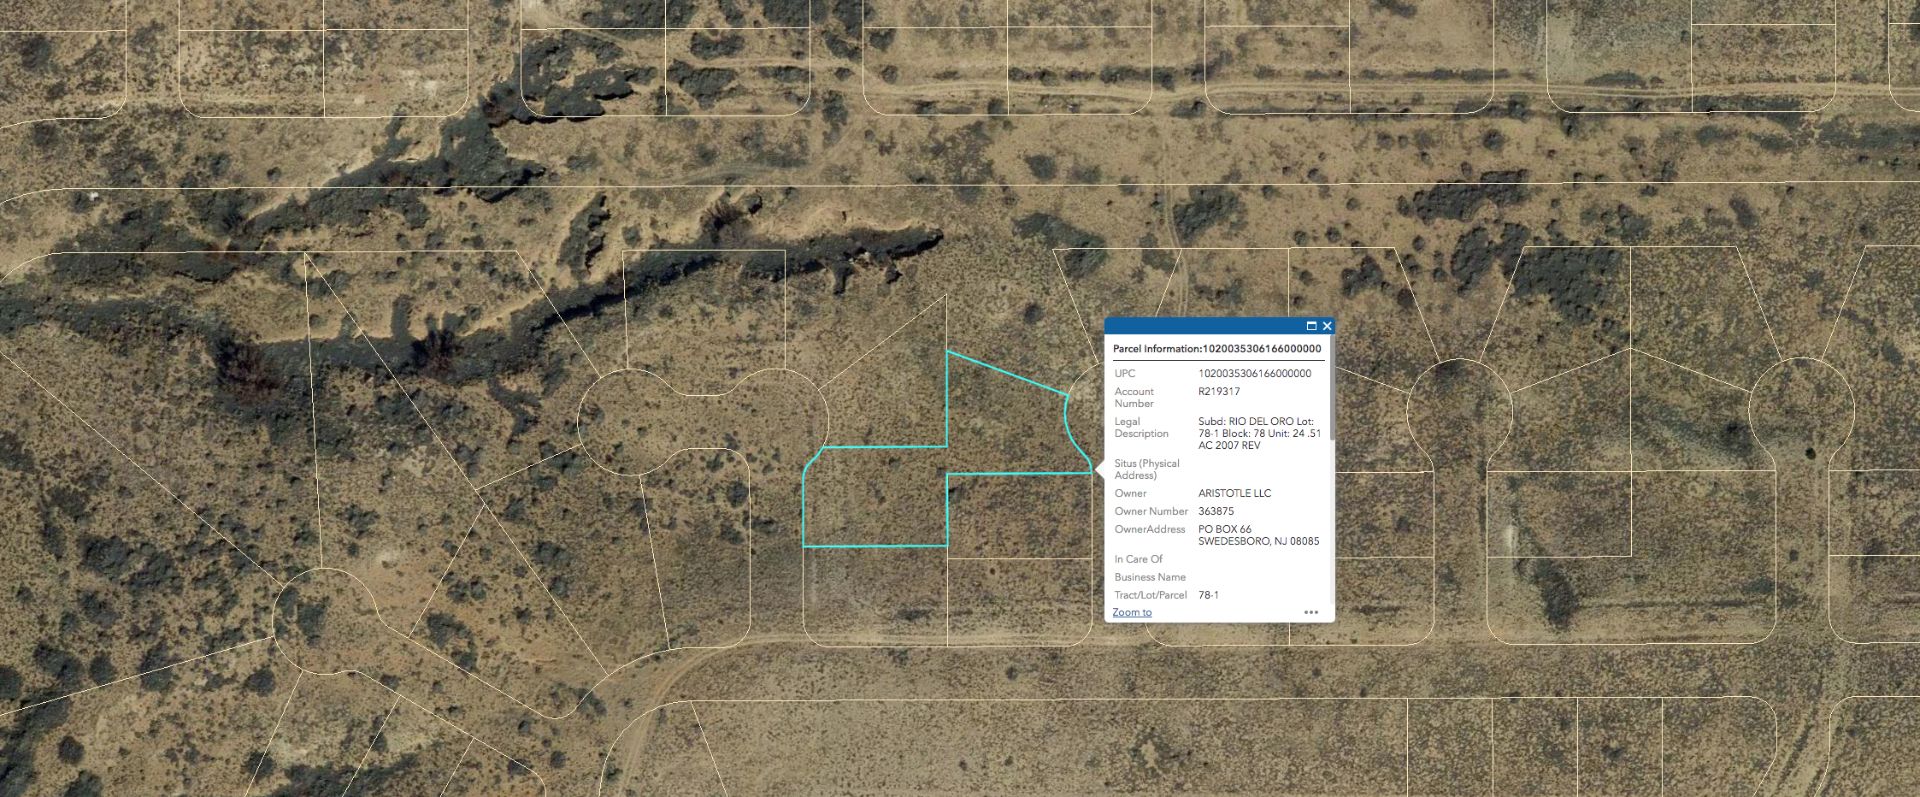 Half-Acre Lot Near the Mountains in New Mexico! - Image 6 of 16